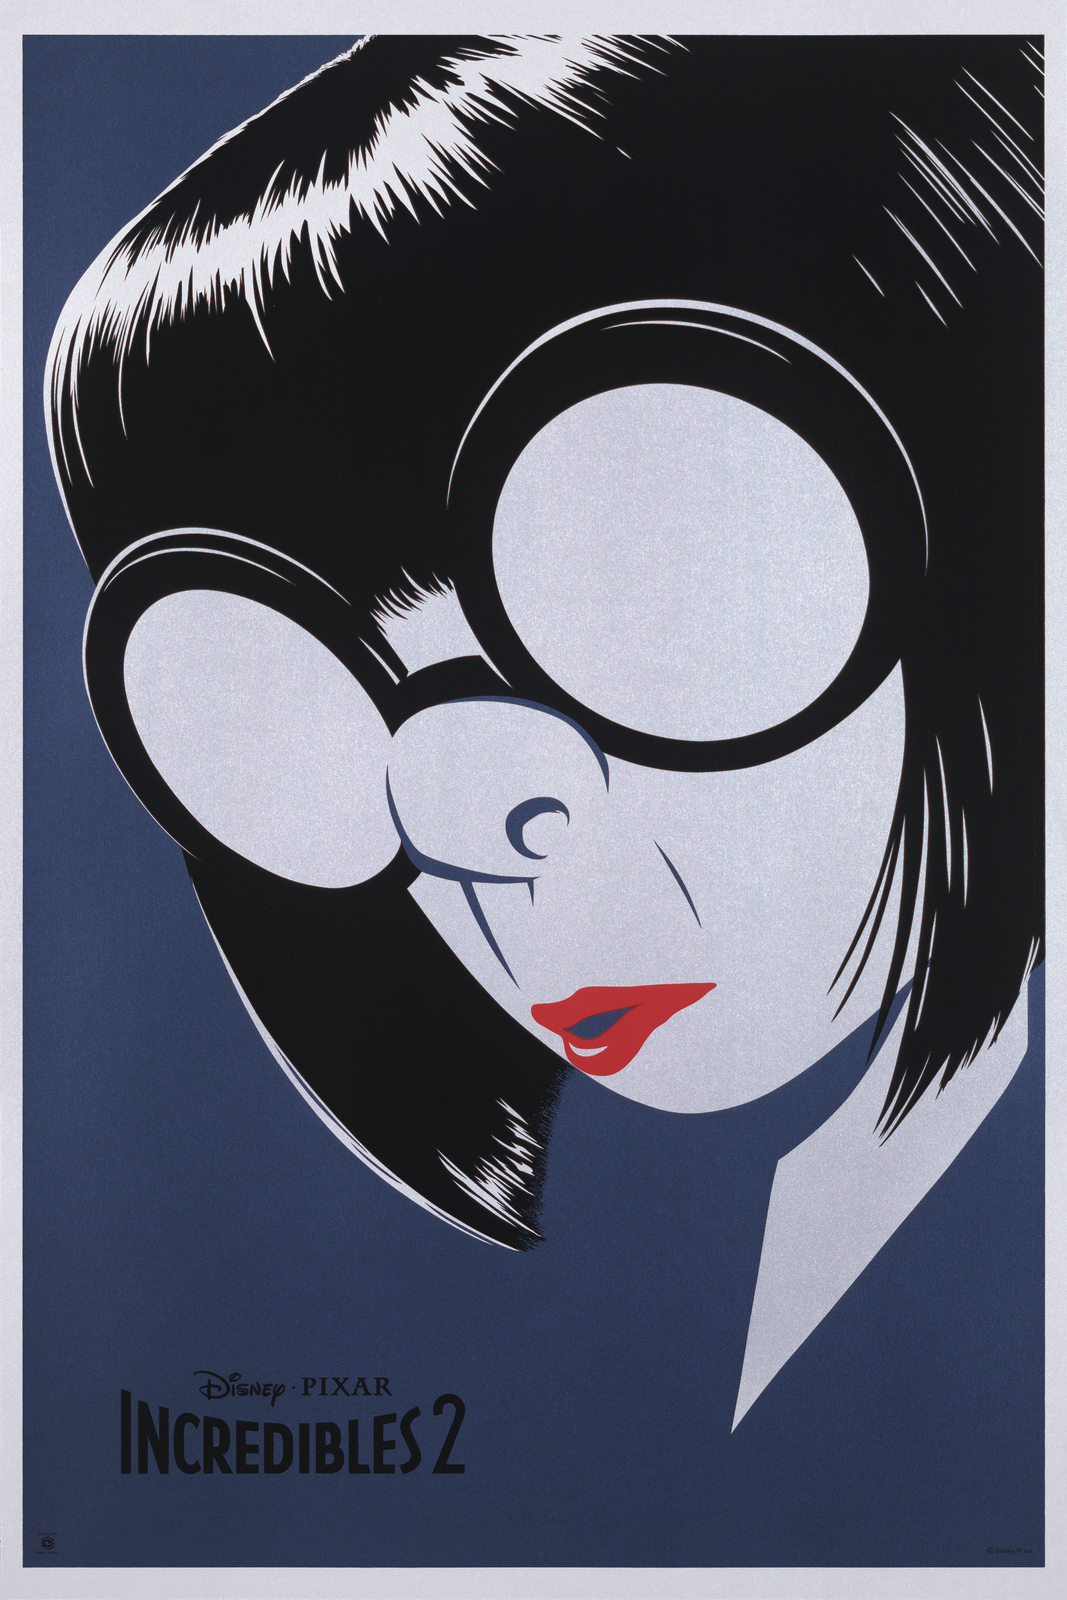 Edna Mode "Welcome Back Dahlings" Incredibles 2 AUS EXCLUSIVE Screen Print